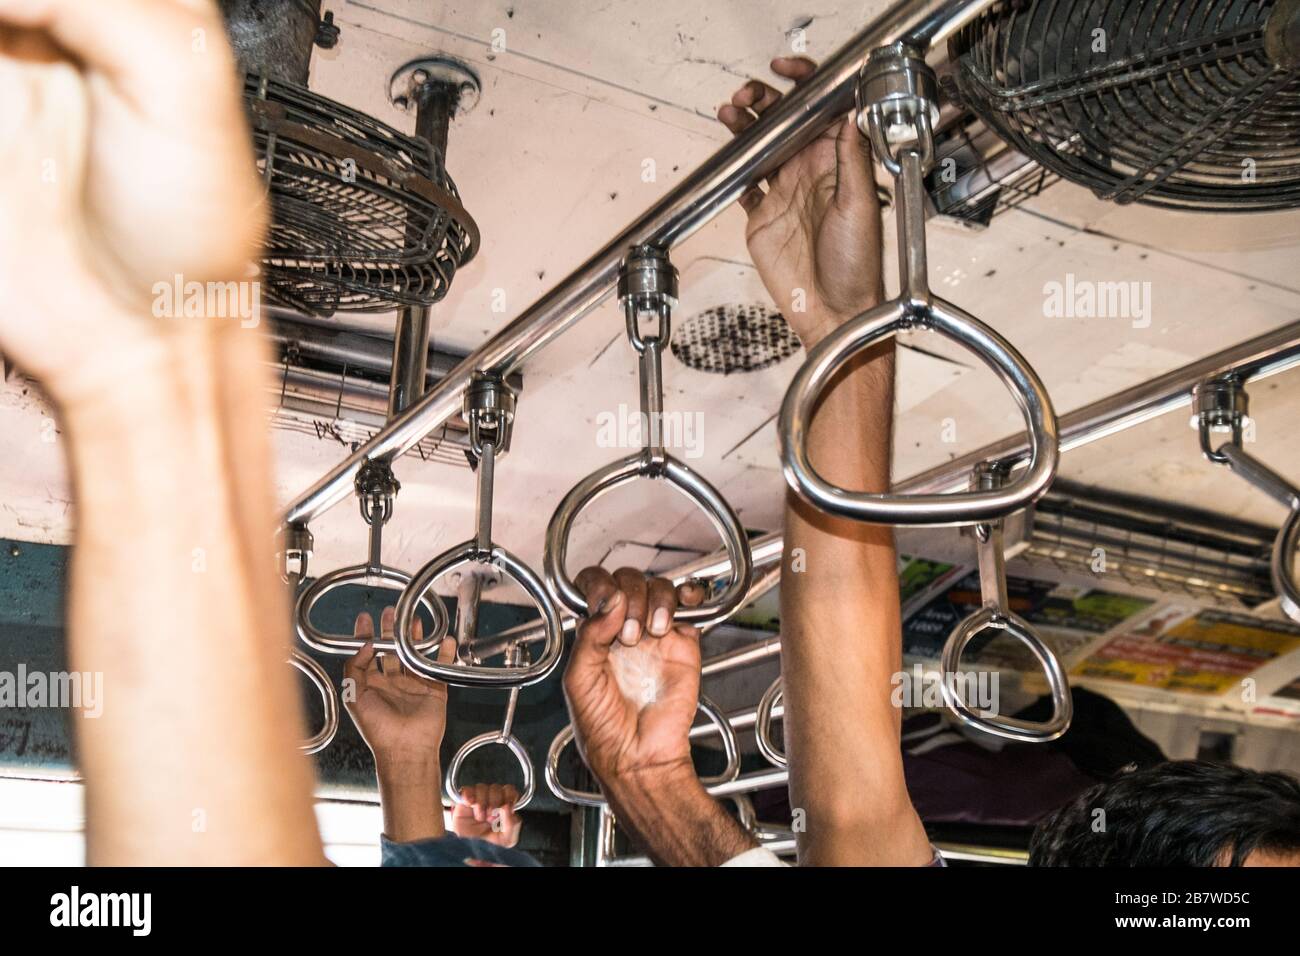 Passengers hands on hand rails on a busy Mumbai commuter train, India Stock Photo